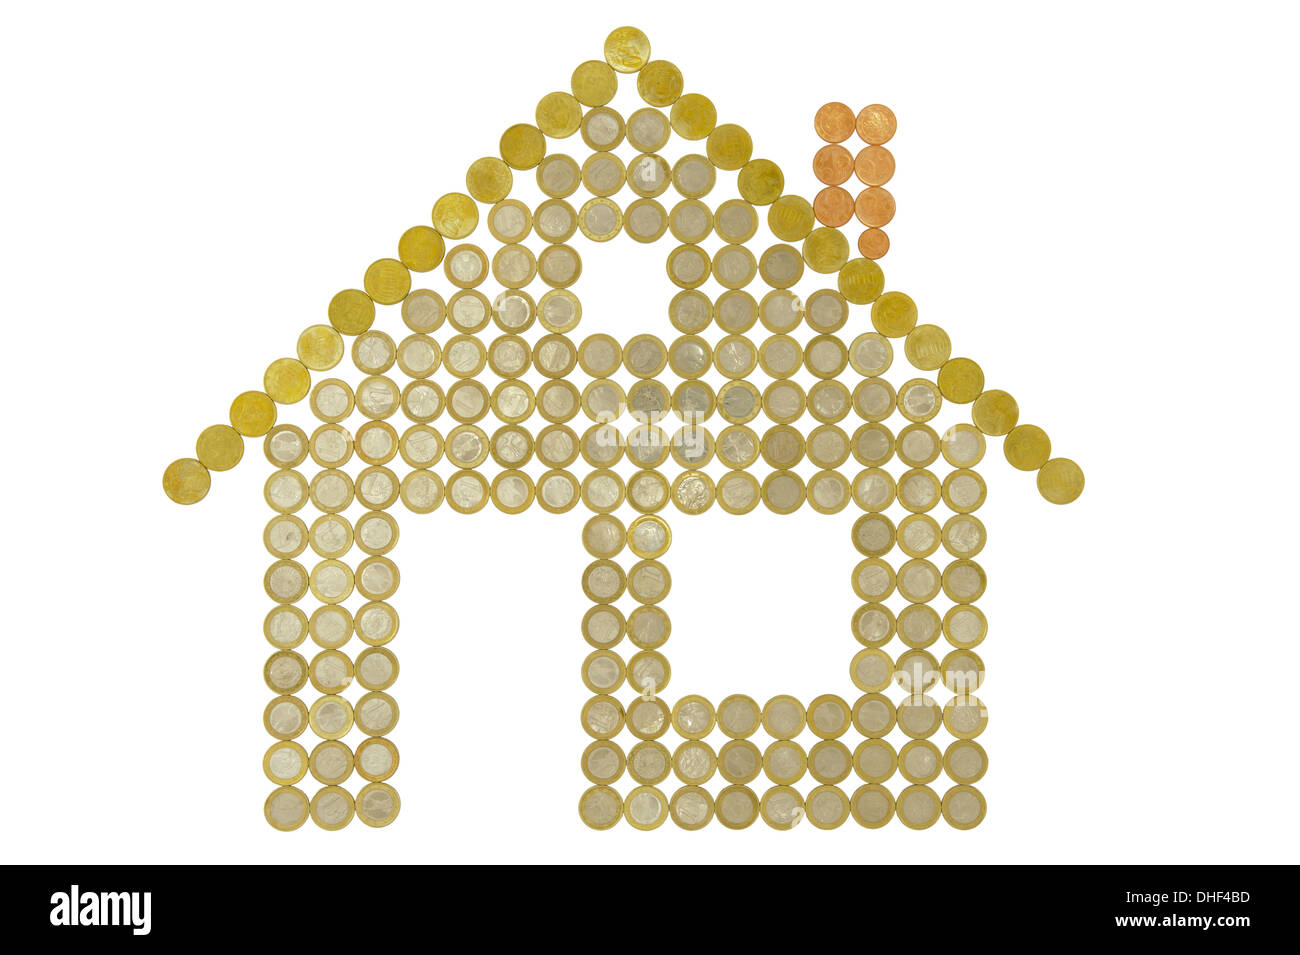 house made with euro coins Stock Photo